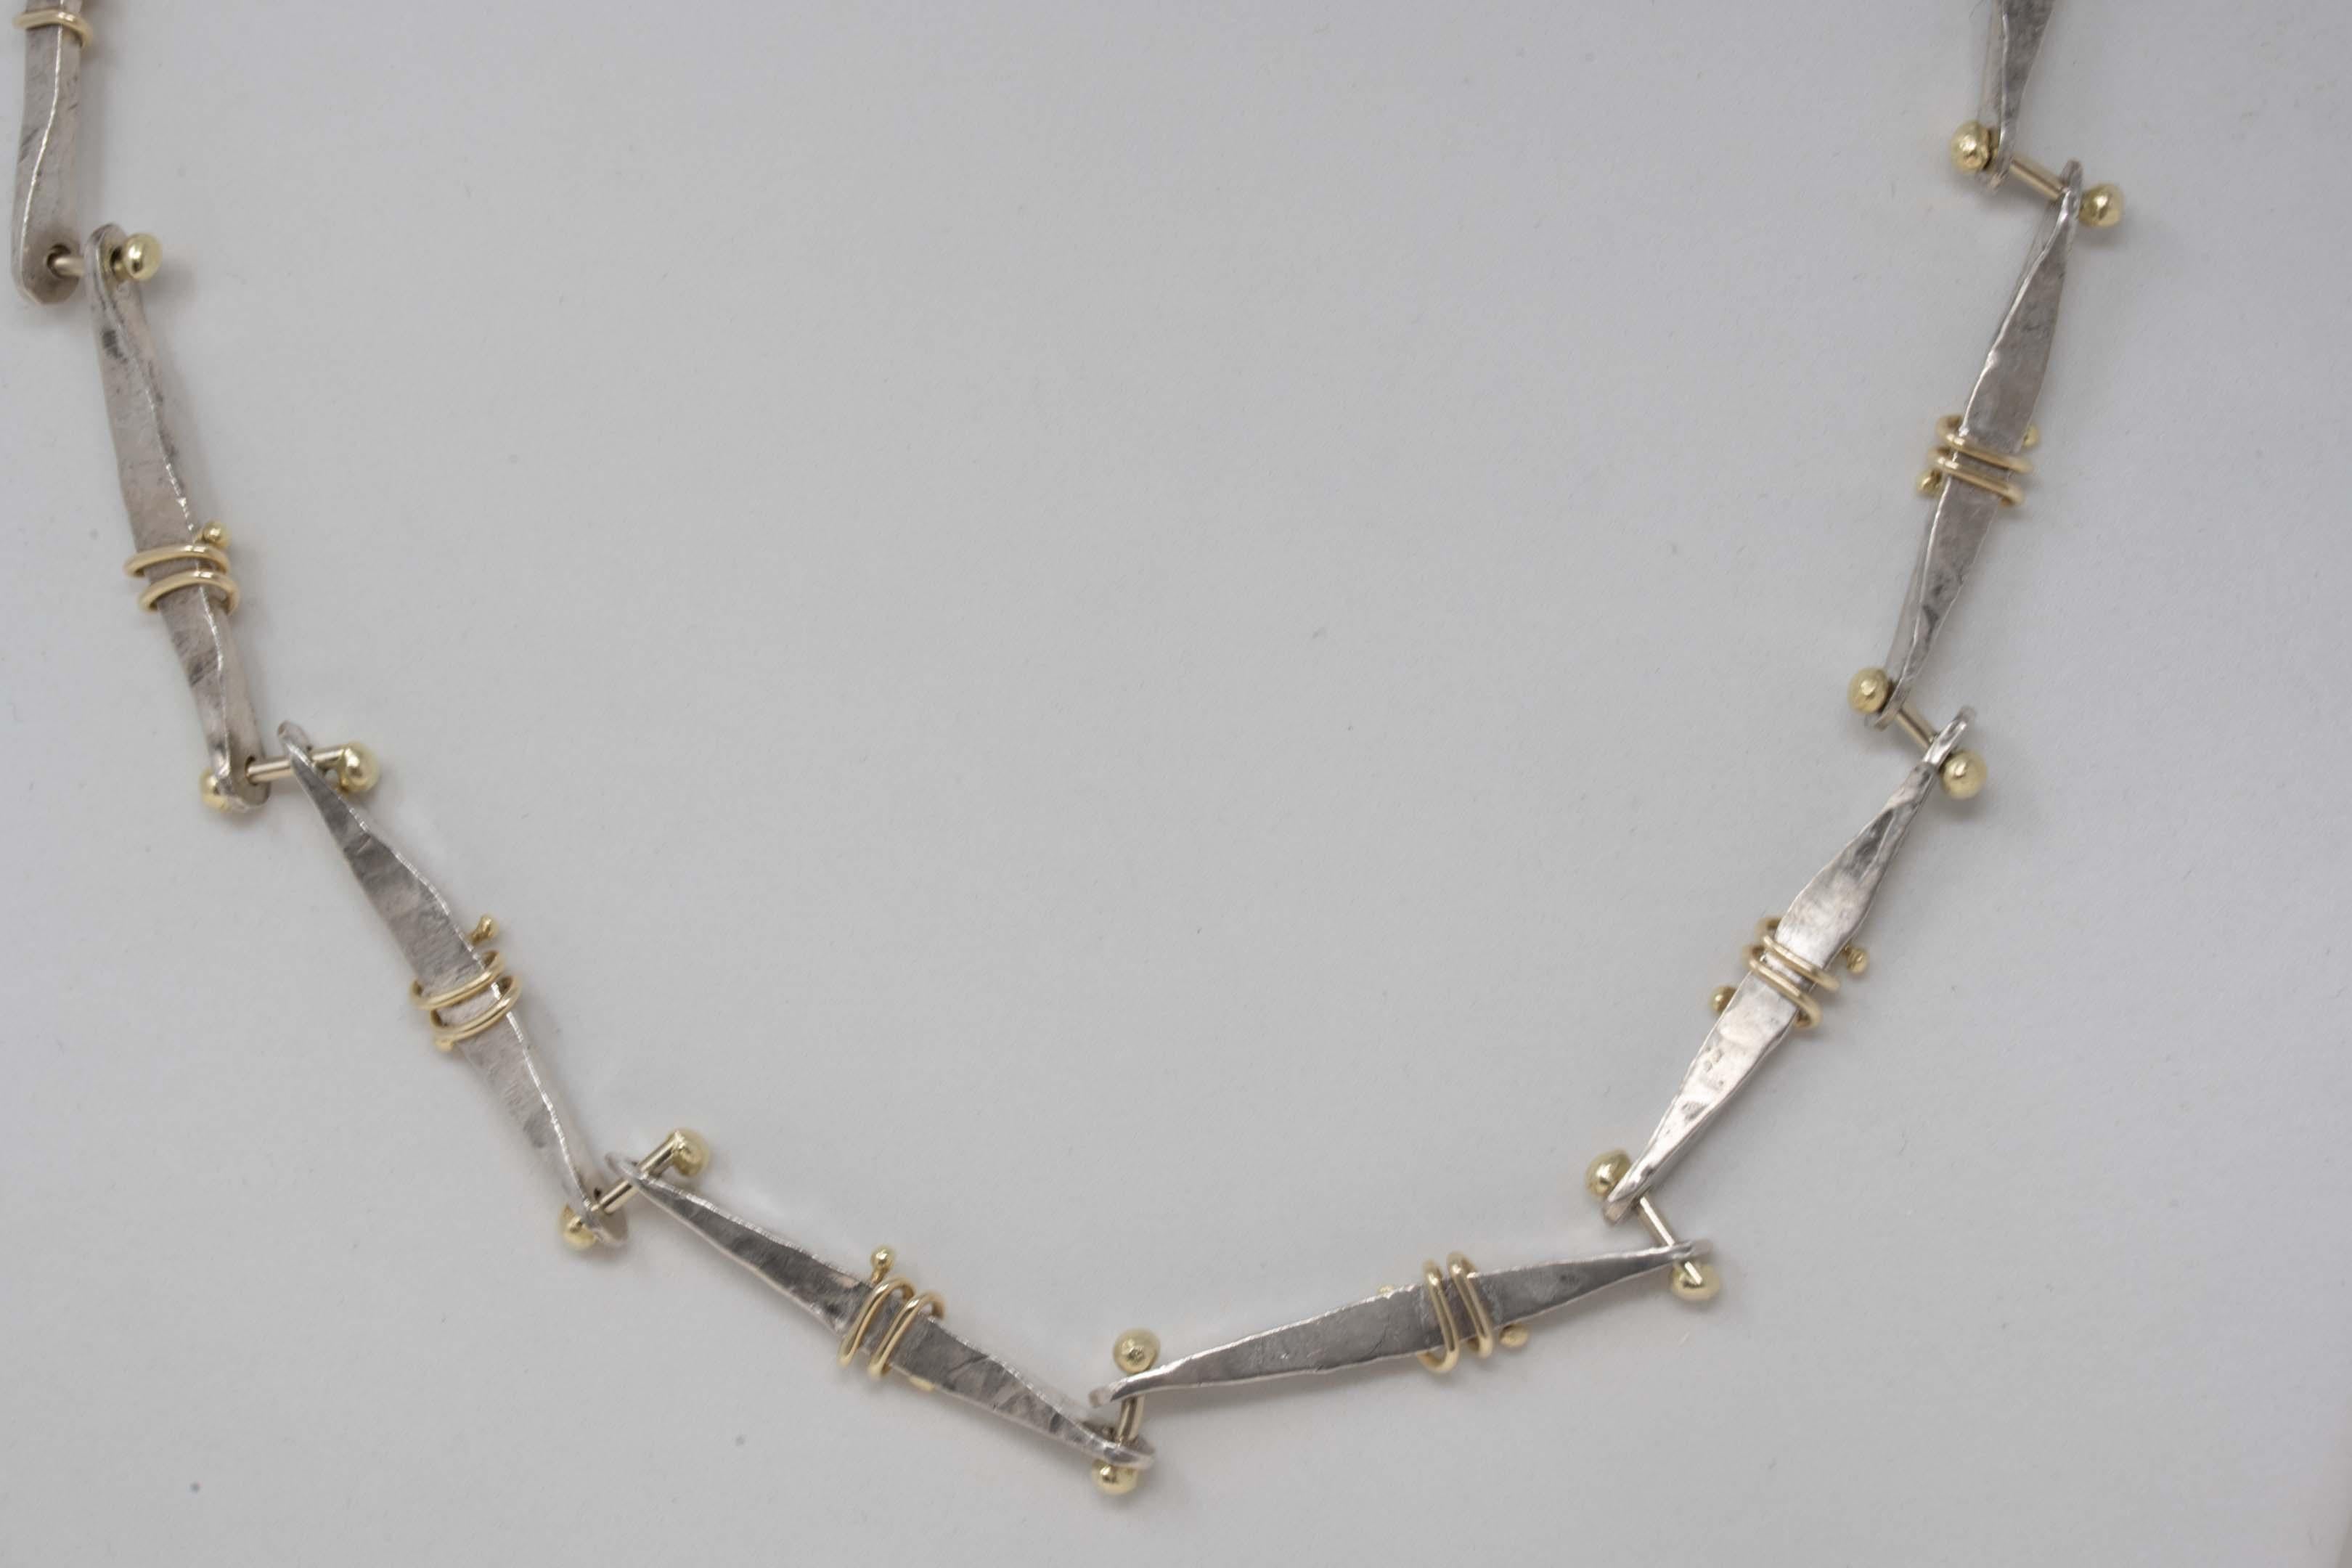 Sana Doumet twirly bone necklace set sterling silver & 18k gold chain. The chain measures 16 1/2 inches long x 0.25 inches wide. Earrings measure 1.75 inches long, fully marked Sana M.D. sterling, 18k. Made in the USA, circa 21st century.